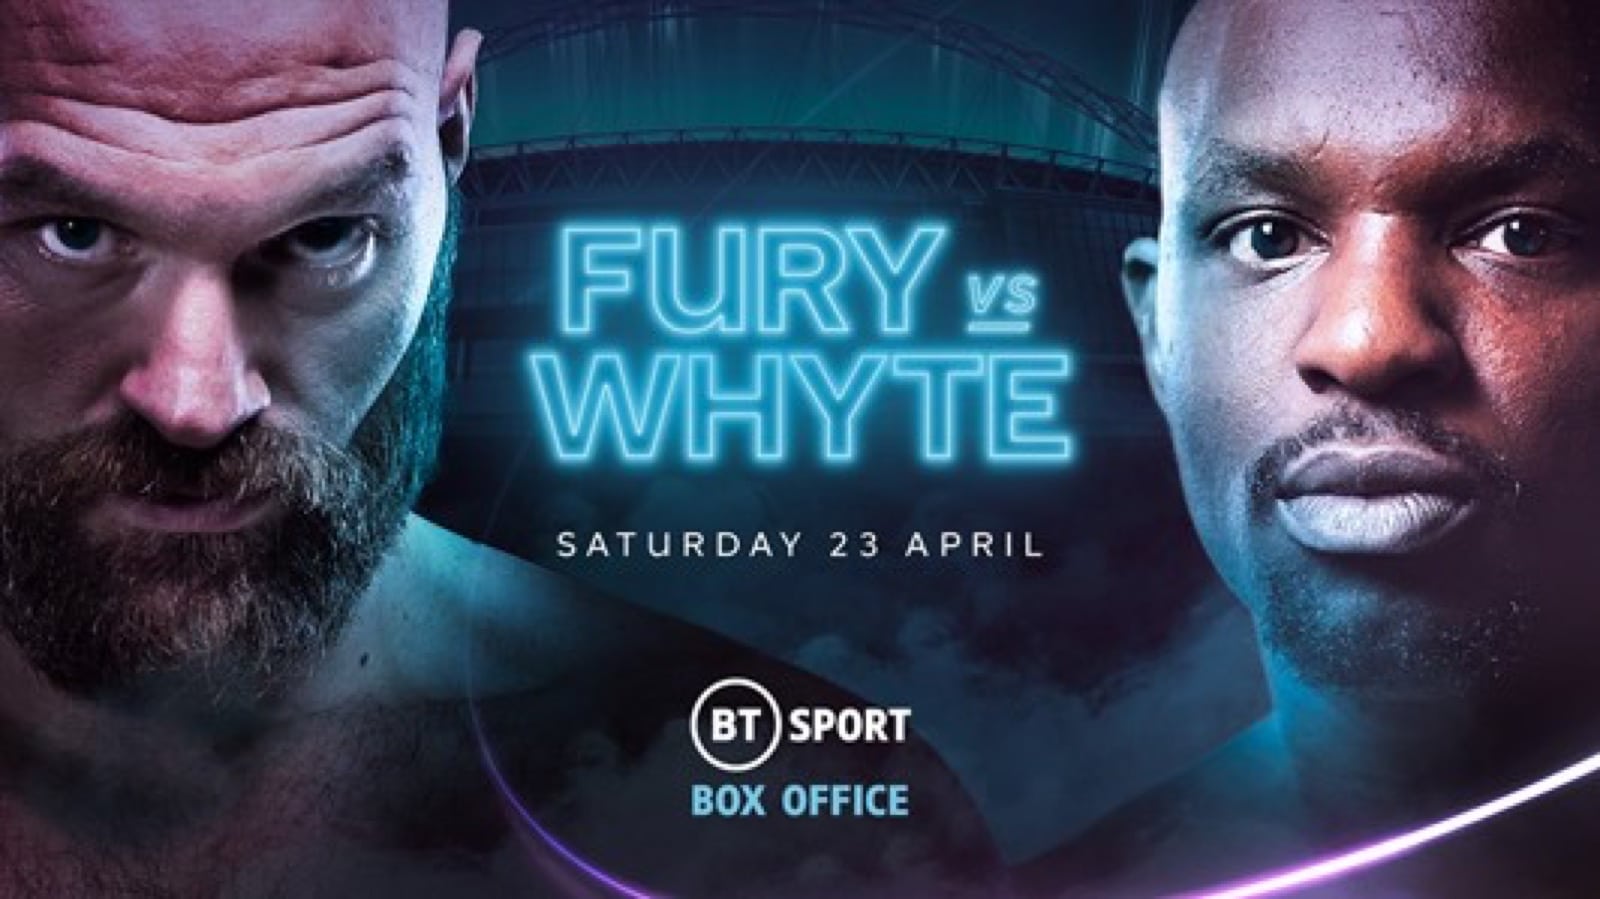 Image: Tyson Fury stops Dillian Whyte within 6 rounds predicts Joseph Parker